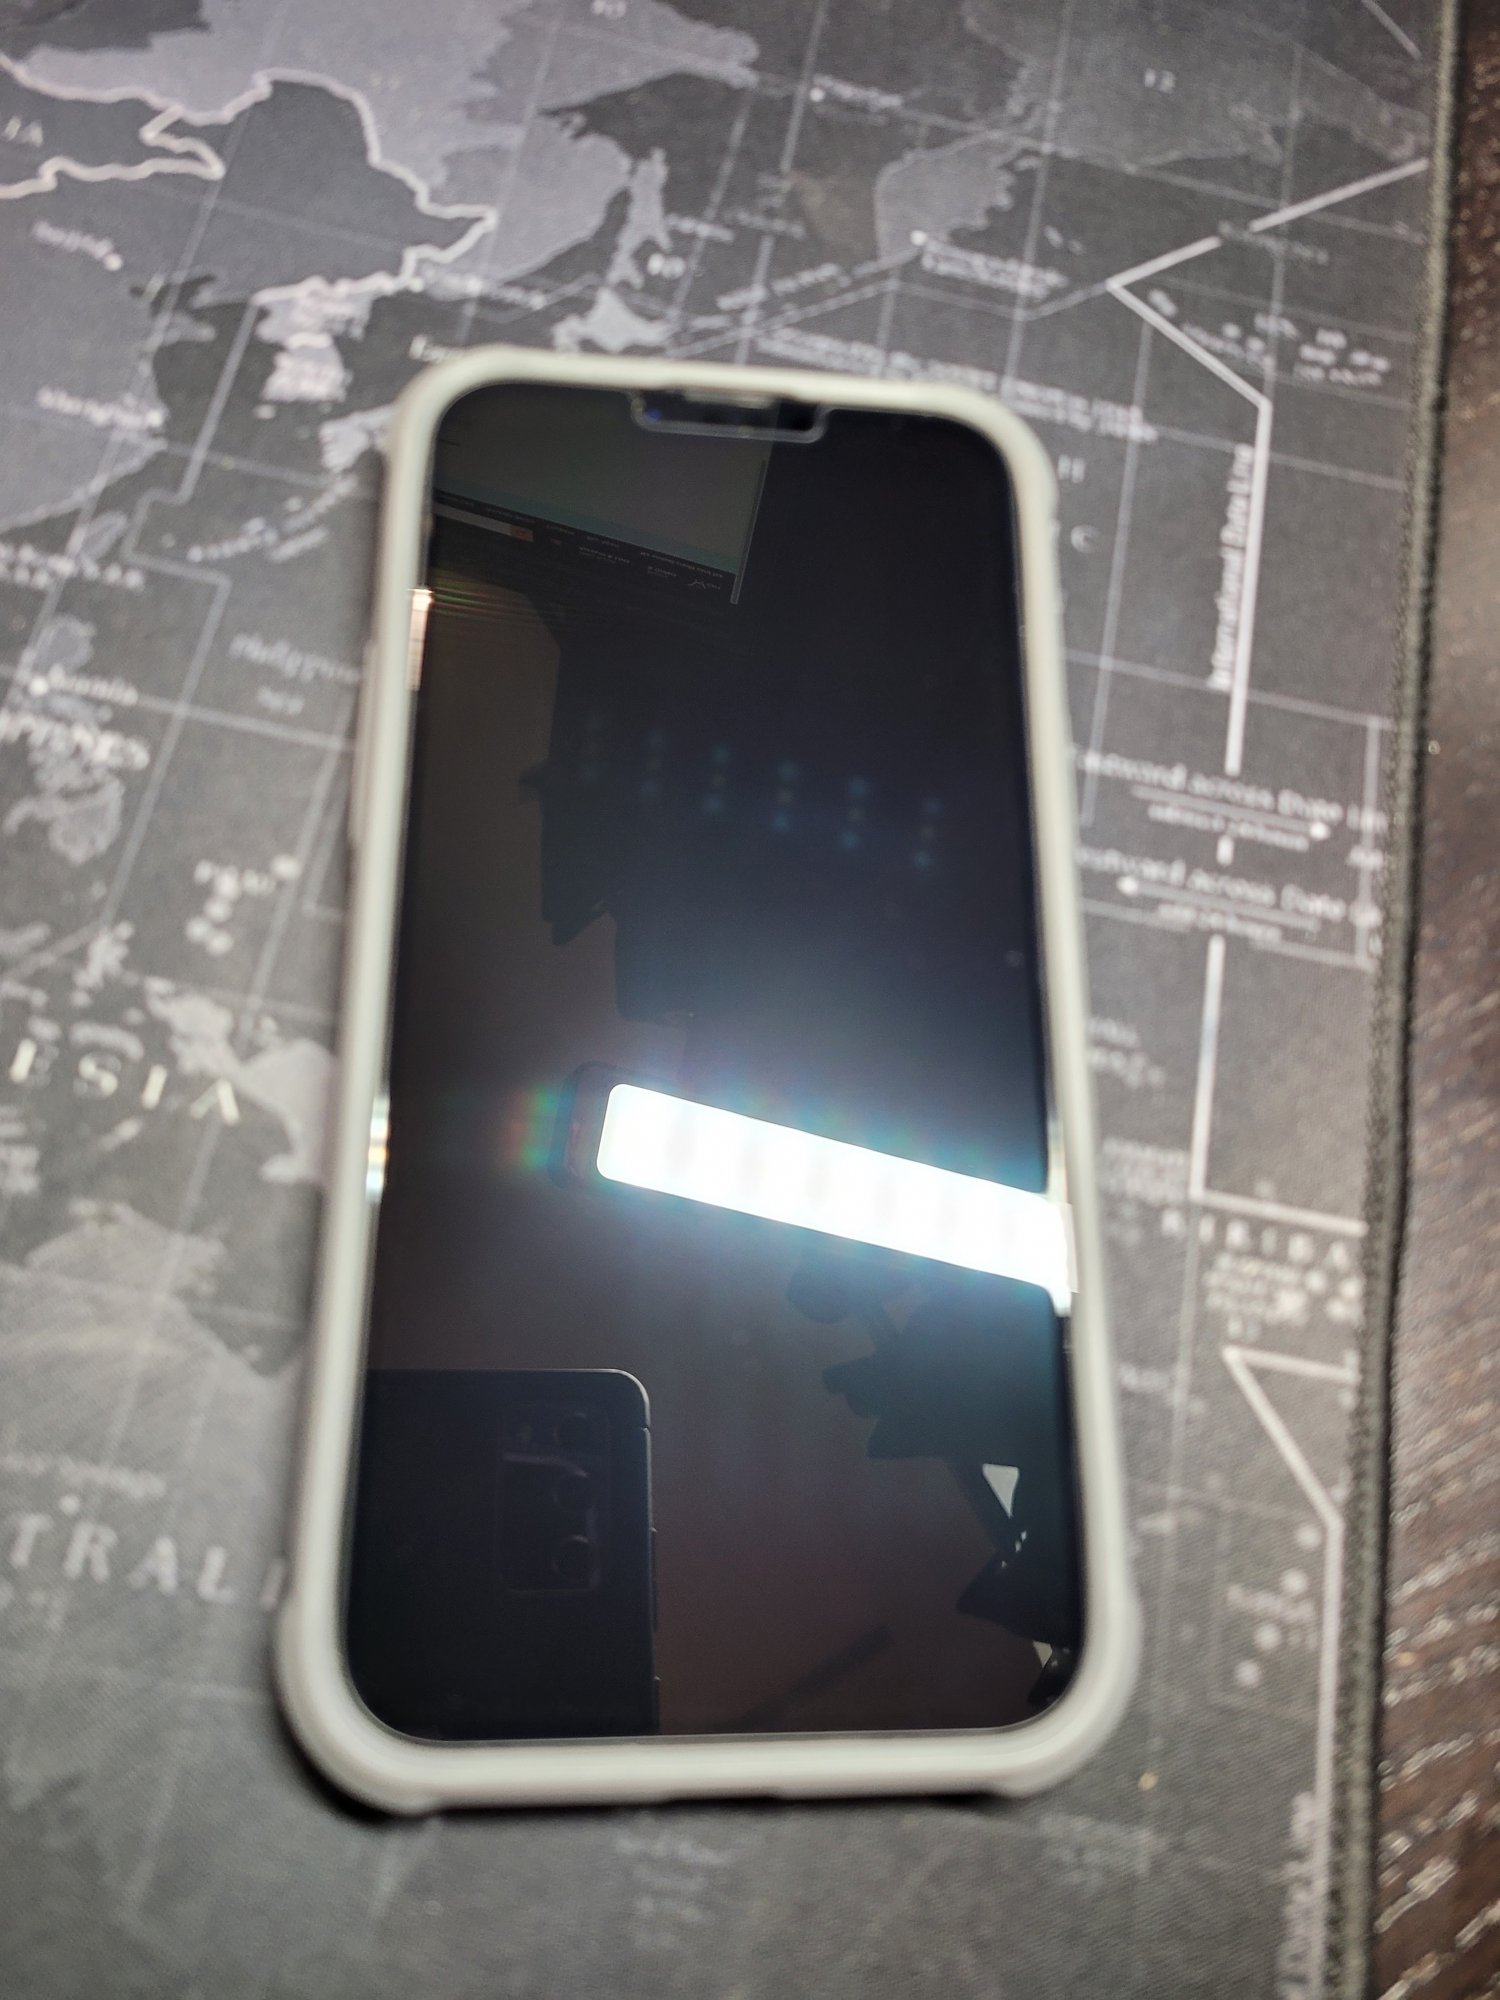 Is it fine to use iPhone without screen protector?